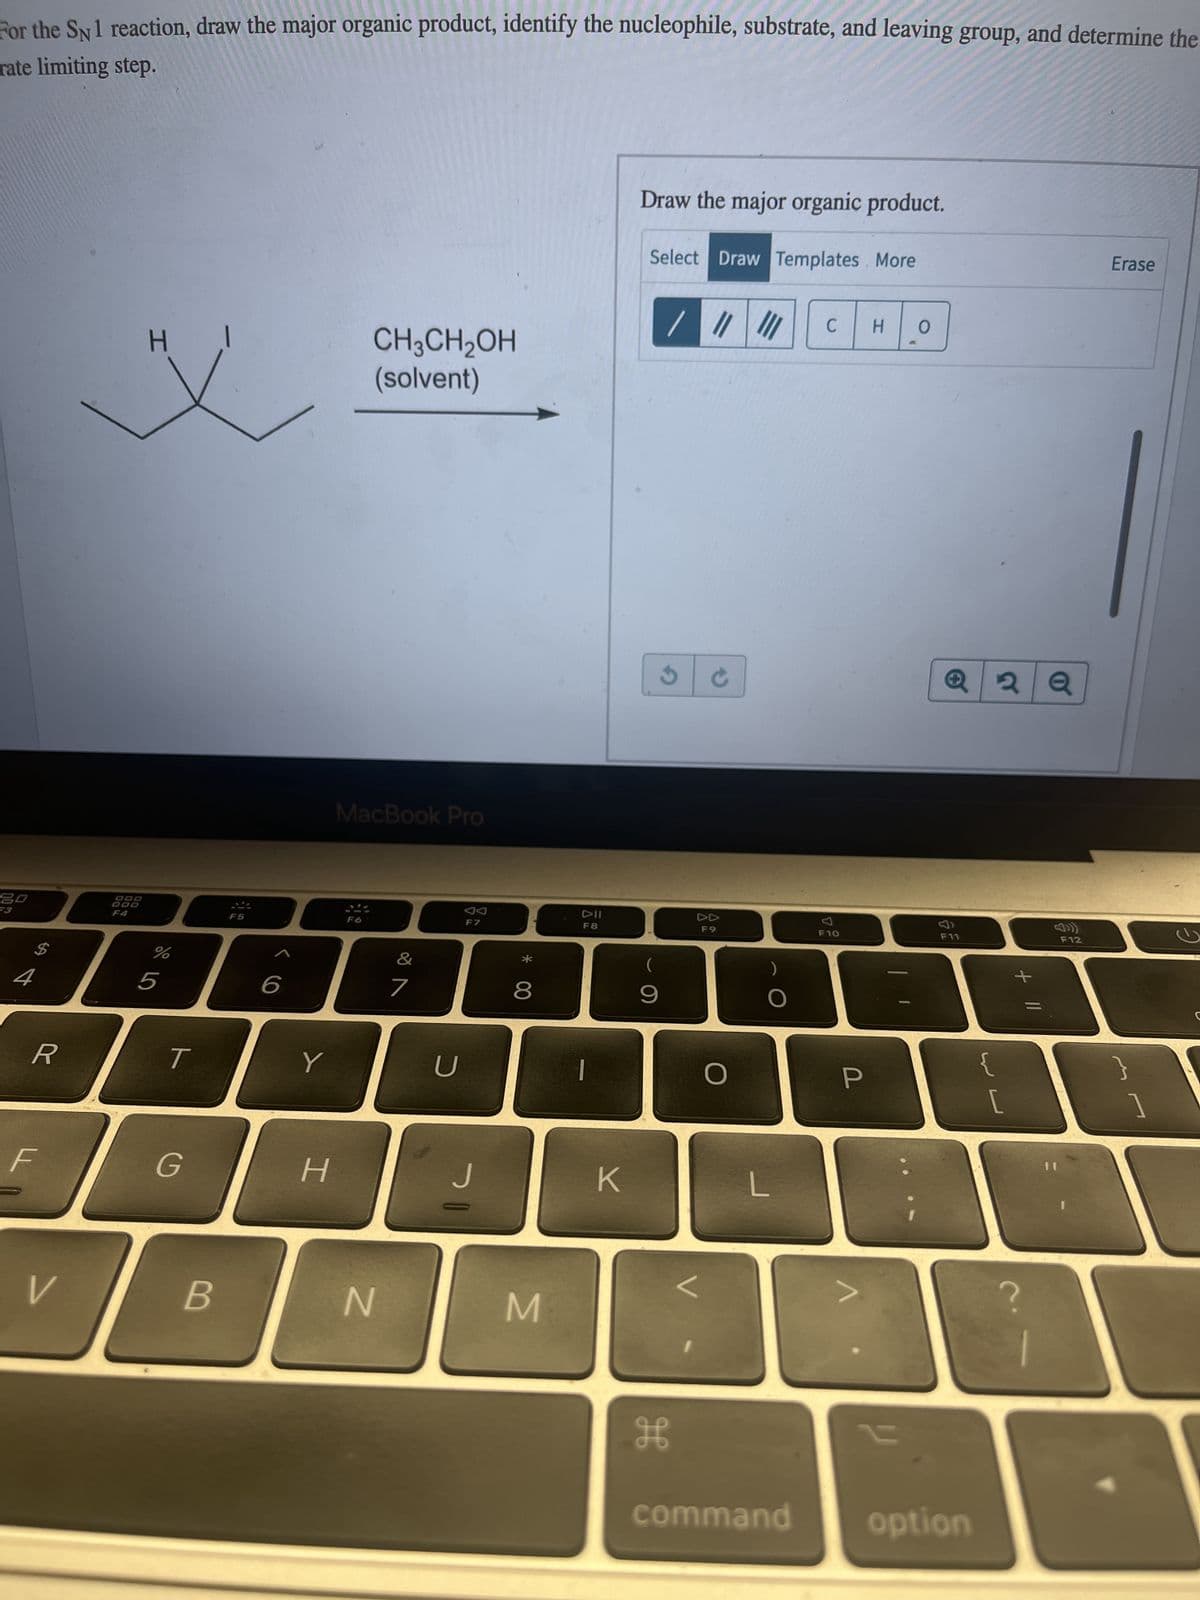 For the SN 1 reaction, draw the major organic product, identify the nucleophile, substrate, and leaving group, and determine the
rate limiting step.
20
R
F
V
DOD
H
%
5
T
G
B
Y
H
CH3CH₂OH
(solvent)
MacBook Pro
F6
N
&
7
U
F7
J
*
8
M
DII
F8
K
Draw the major organic product.
Select Draw Templates. More
9
/ | ||
H
F9
O
L
C H 0
F10
P
A
23
Q2Q
F11
command option
3
?
F12
Erase